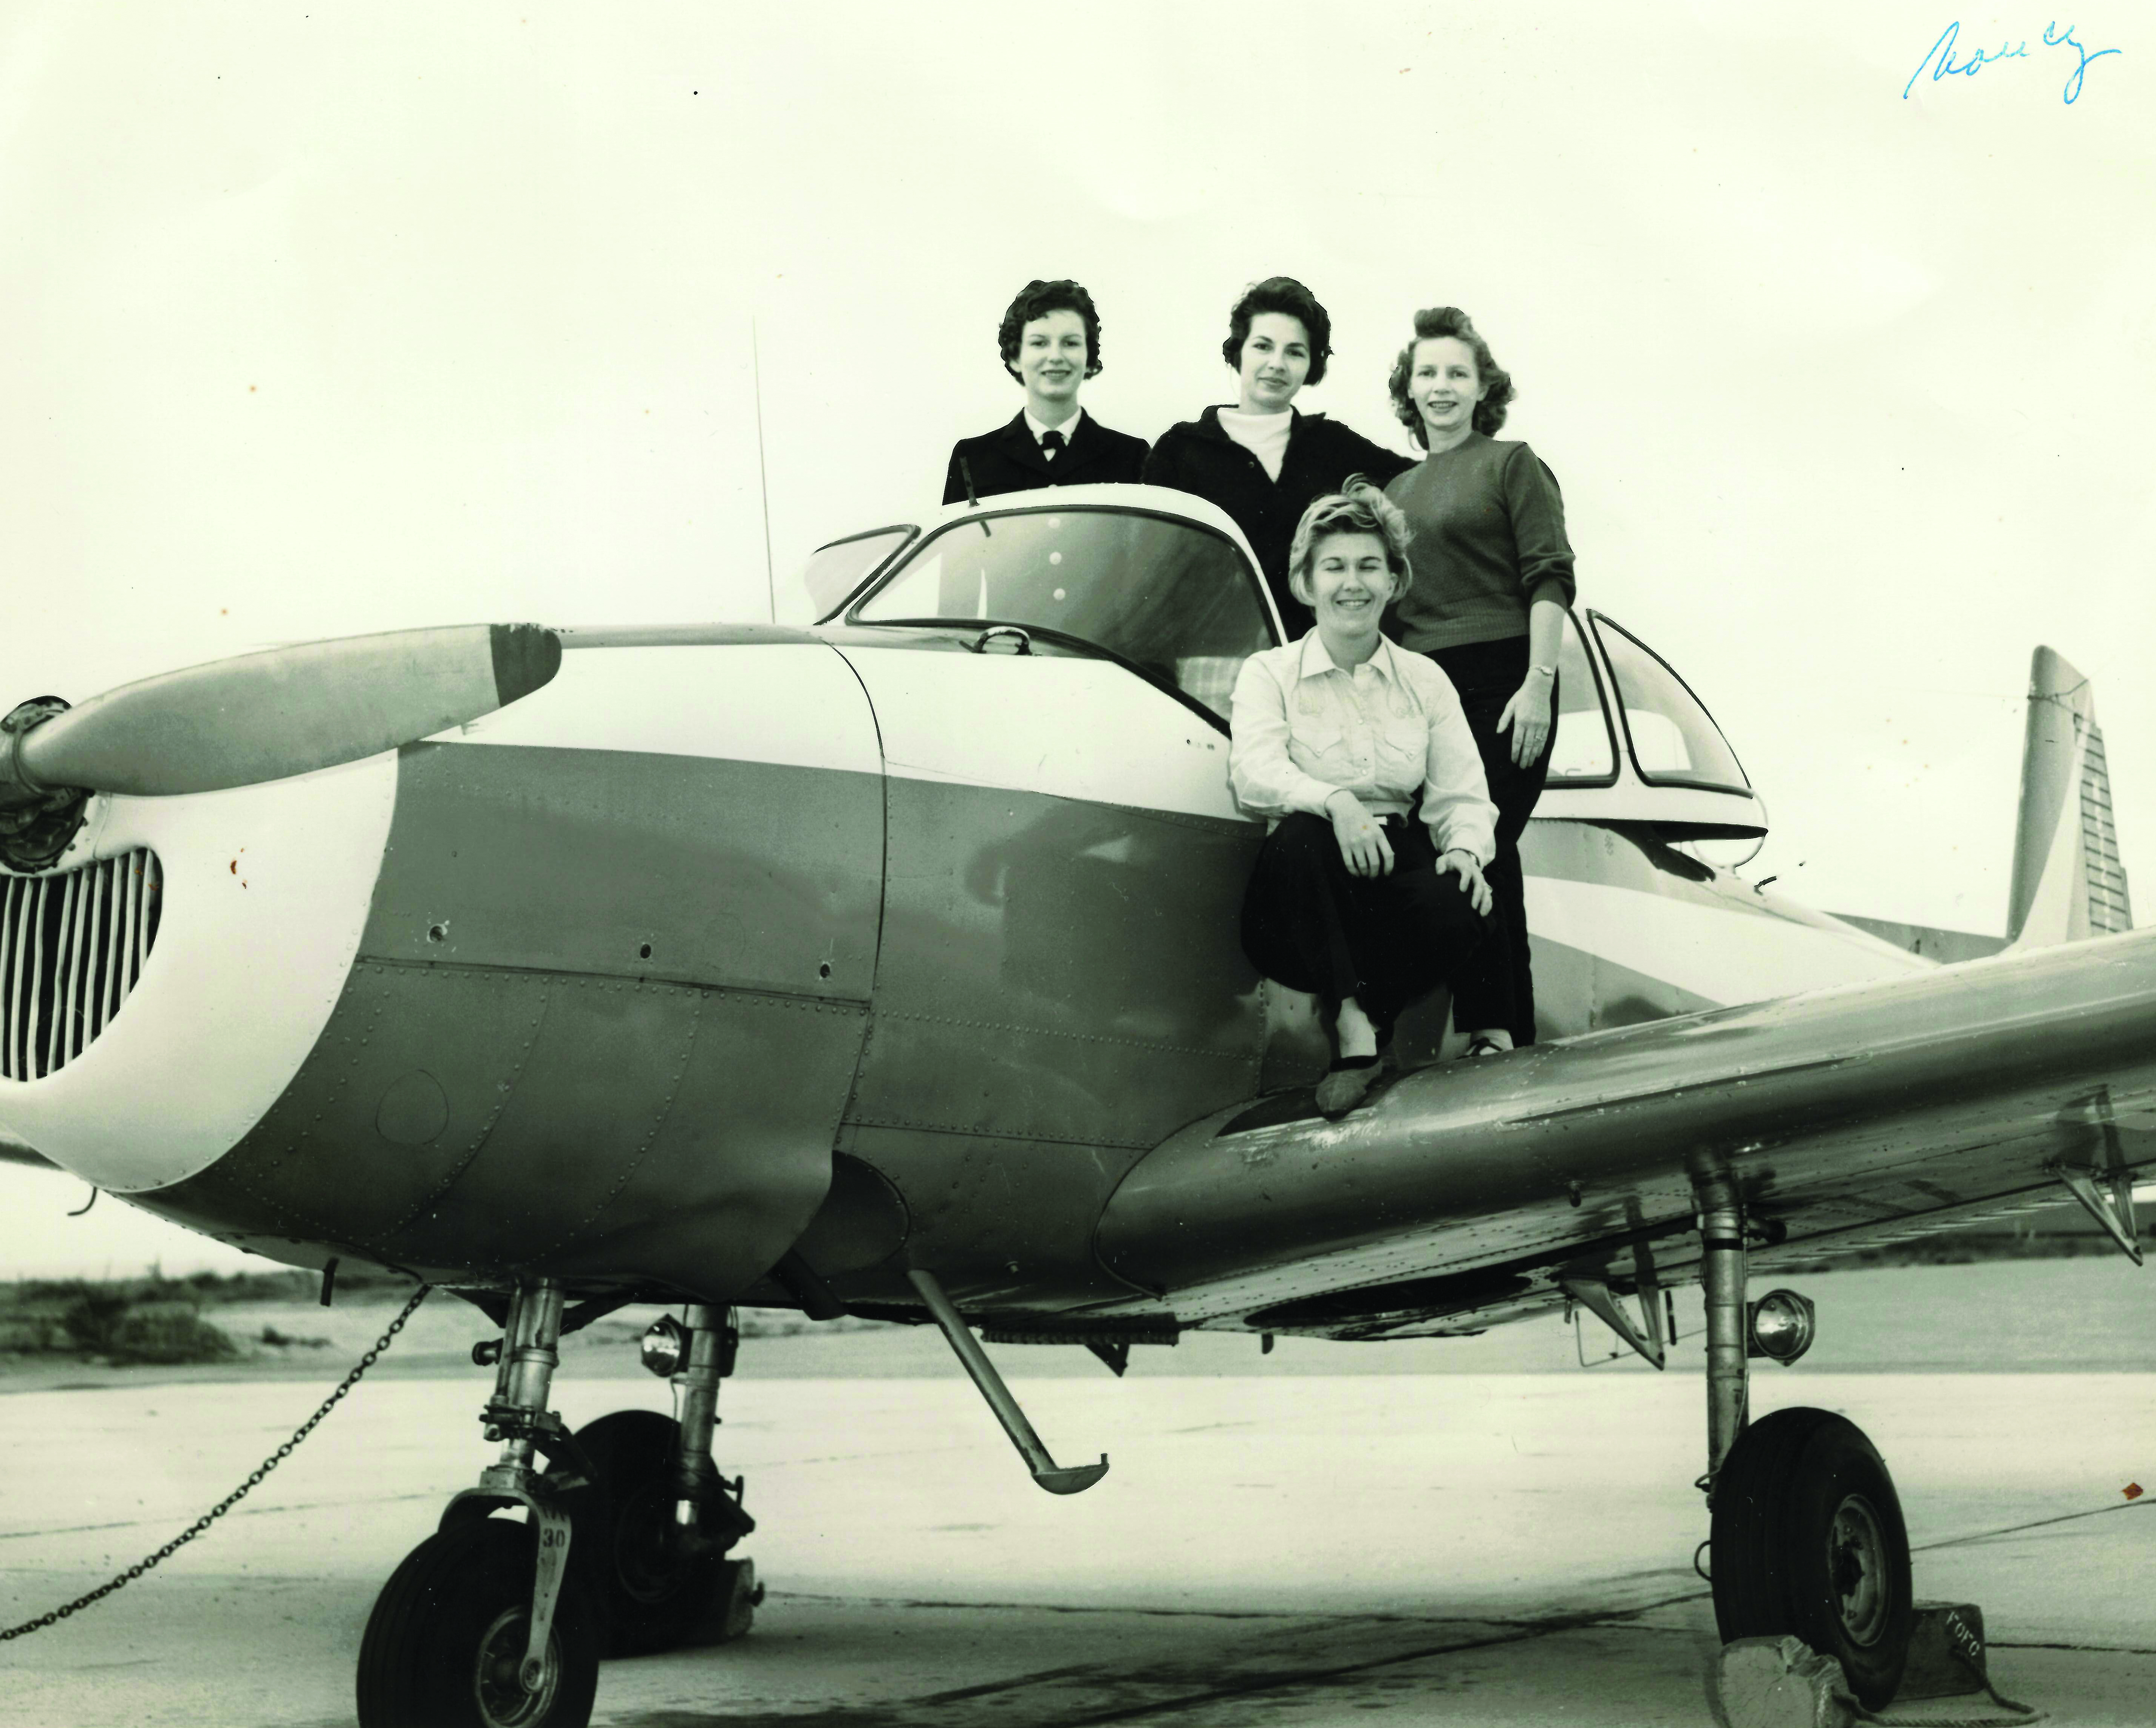 When Nancy Hunter was in her first assignment
        at the Navy Postgraduate School in Monterey, she
        obtained her private pilot’s license; in this flying
        club photograph, she is standing at the far left.
        (Photo courtesy of author)